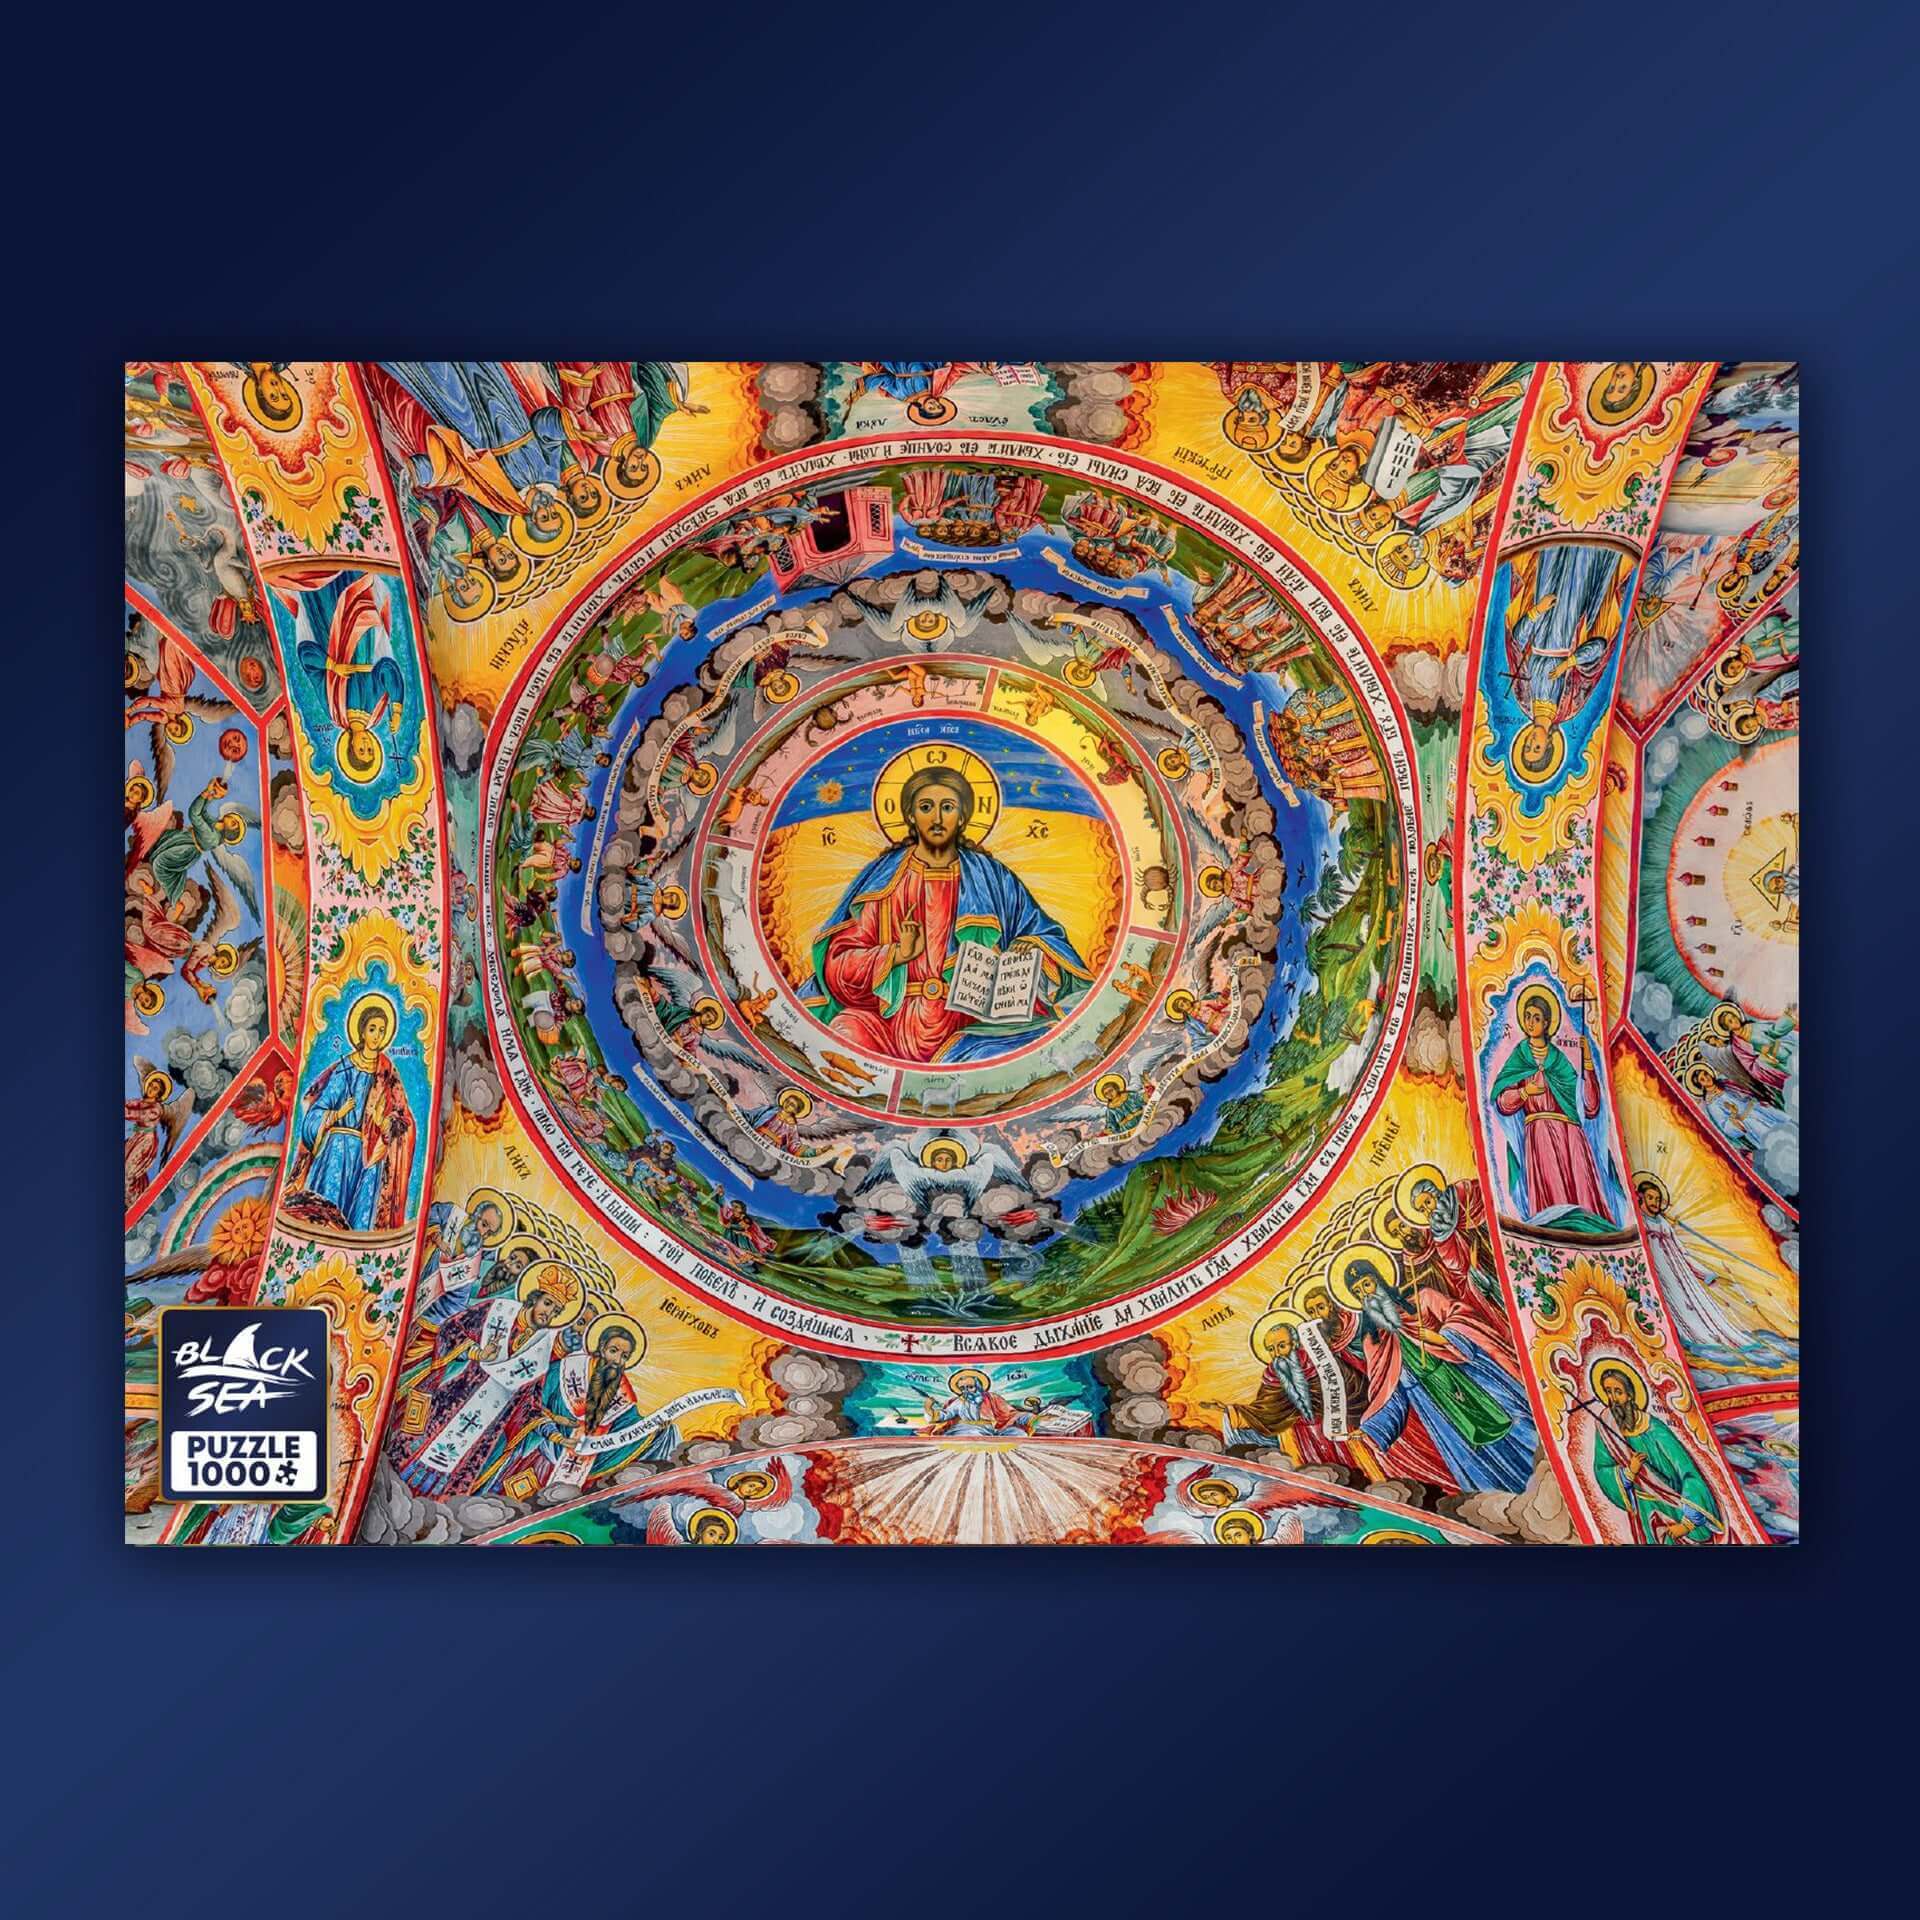 Puzzle Black Sea Premium 1000 pieces - Rila Monastery Frescoes, Rila Monastery has endured ten centuries of the elements, raids and attacks and it lives on, preserving the magnificence of its medieval wall paintings. Colours and themes come together in un